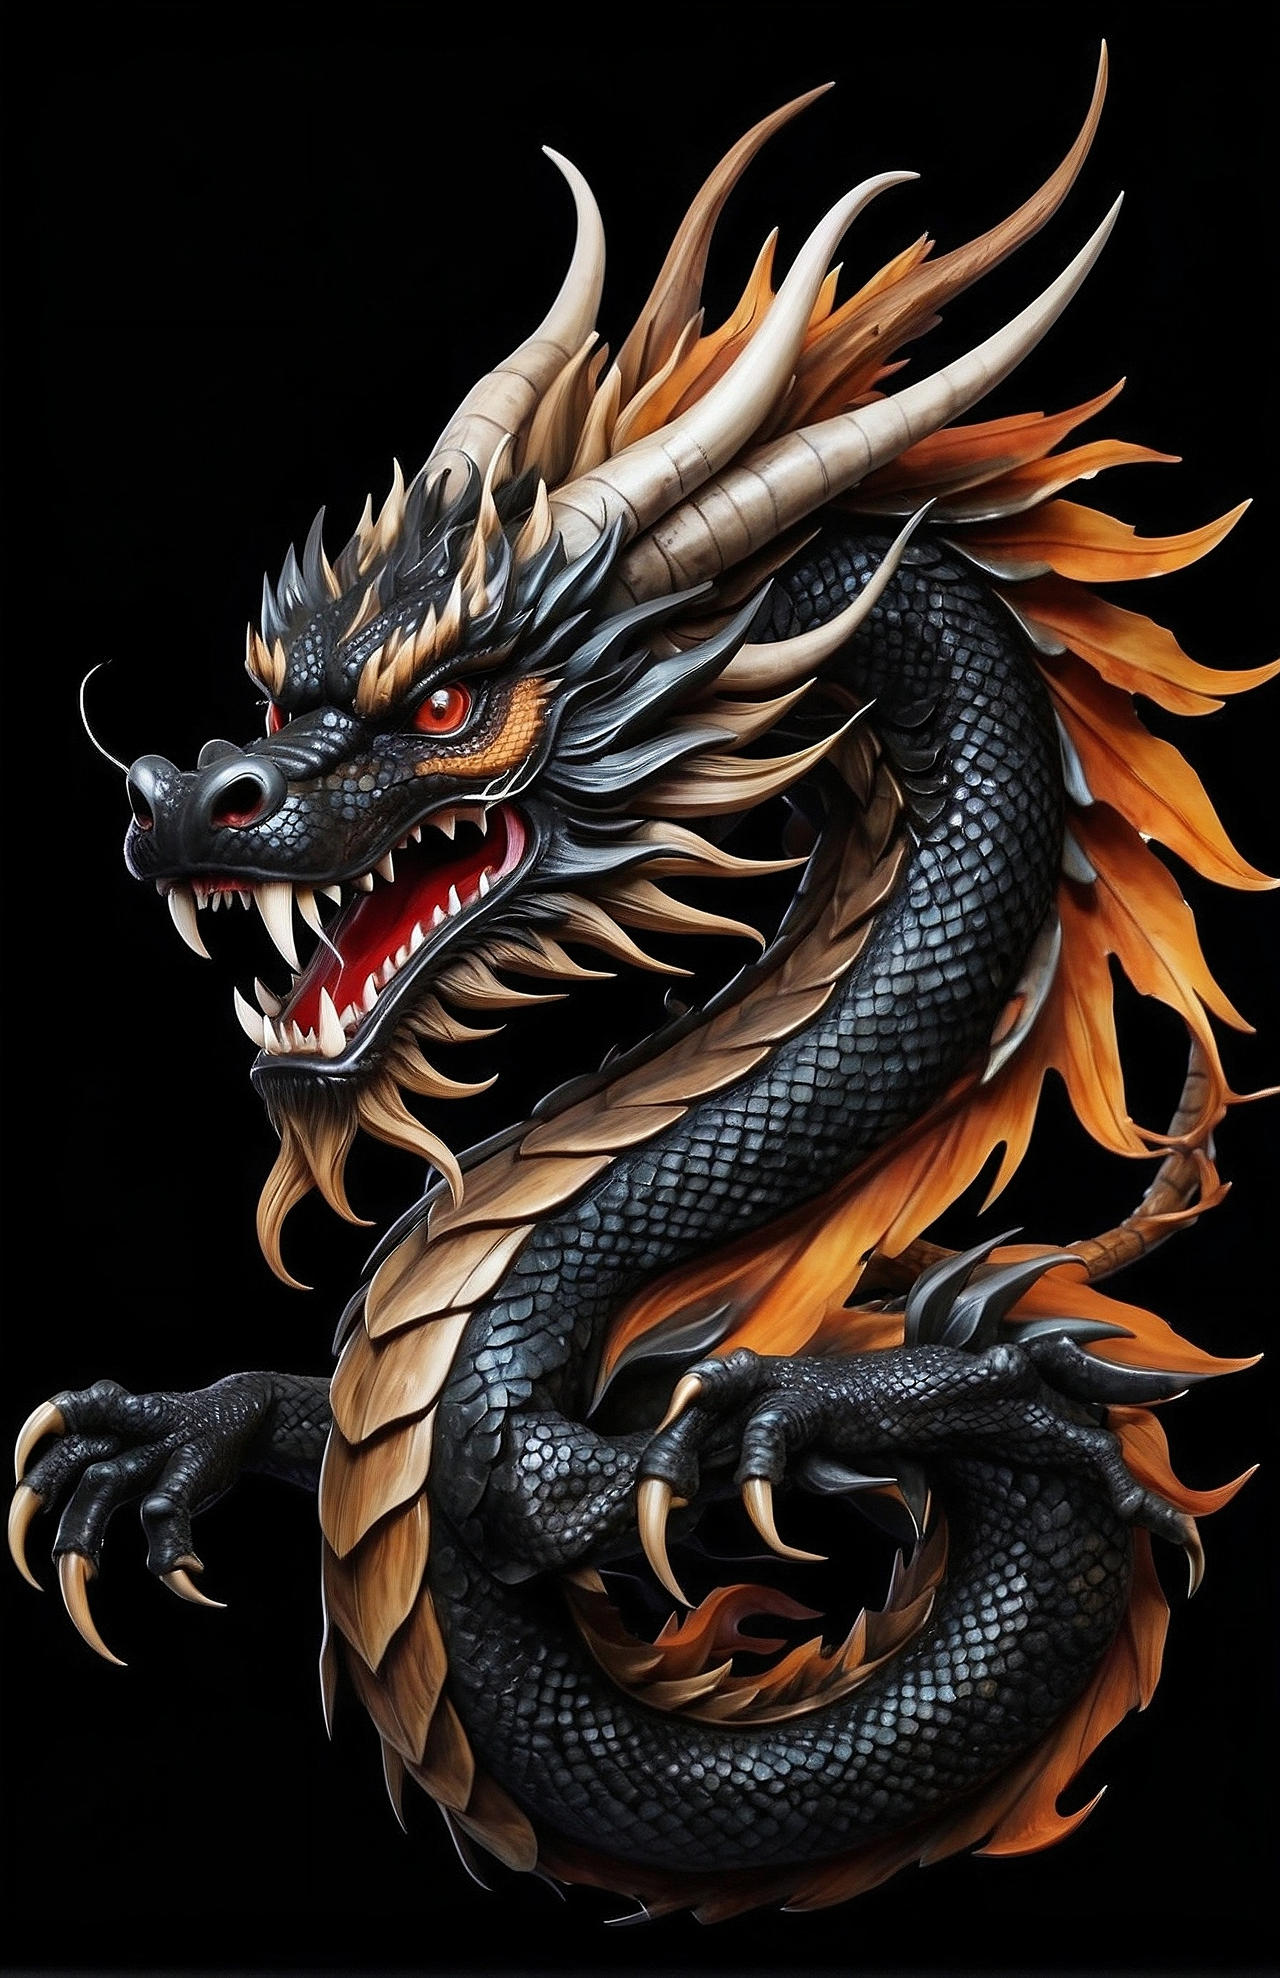 sticker Chinese wood dragon with 4 claws B by sbcreation2025 on